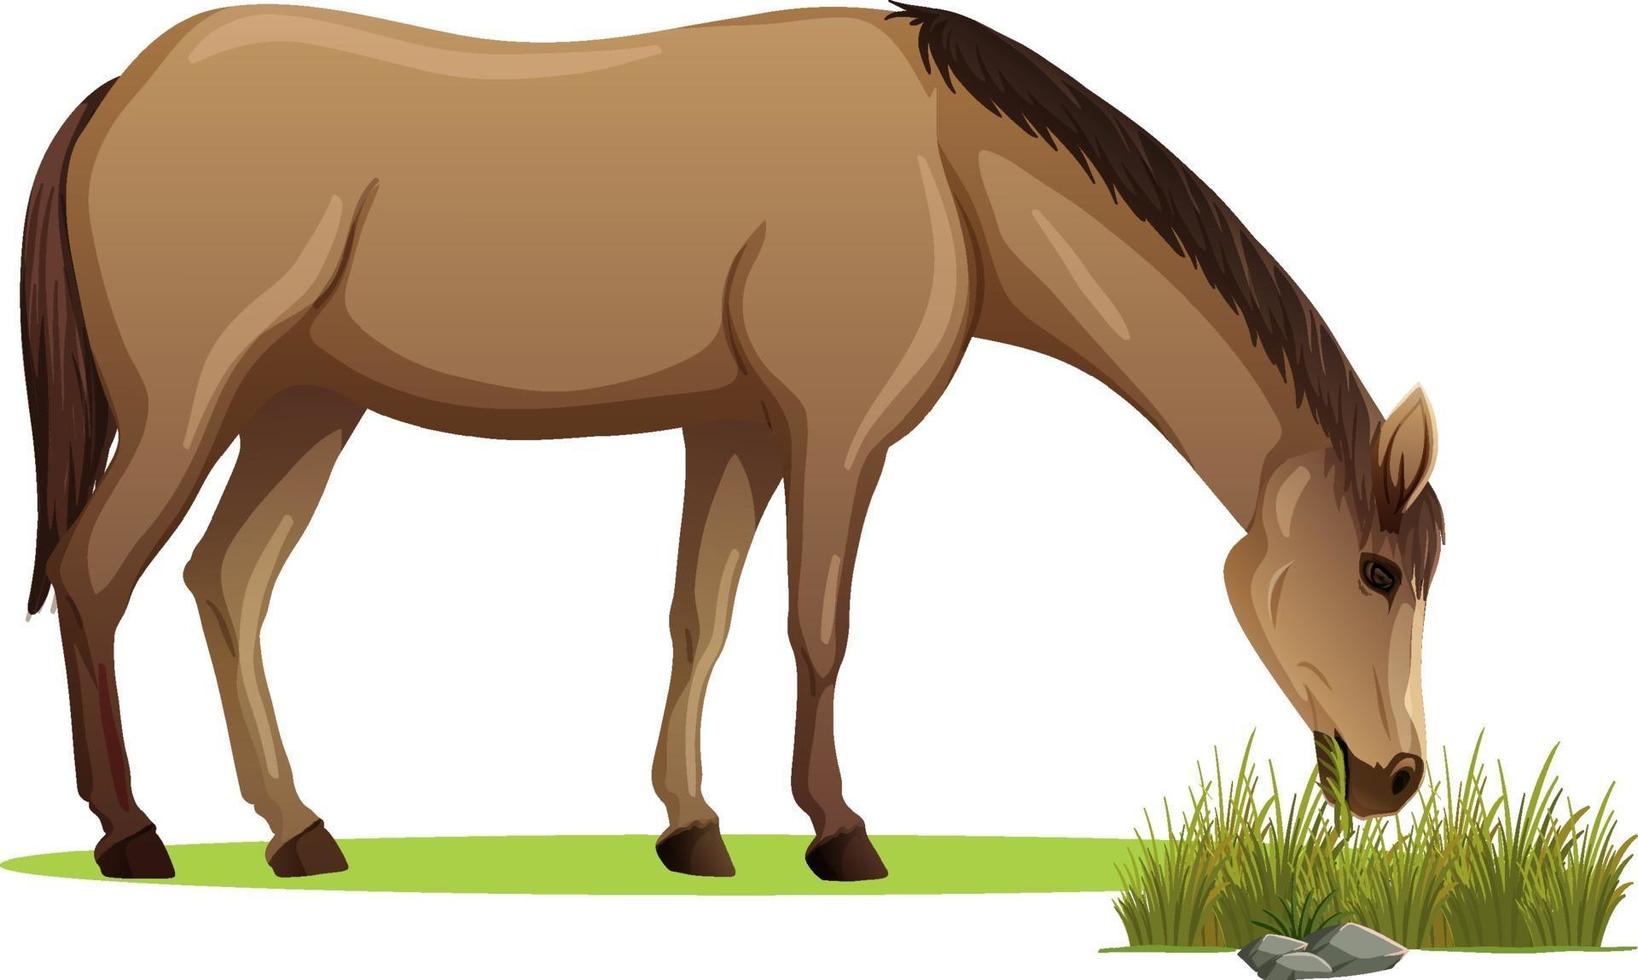 A horse eating grass in cartoon style isolated vector